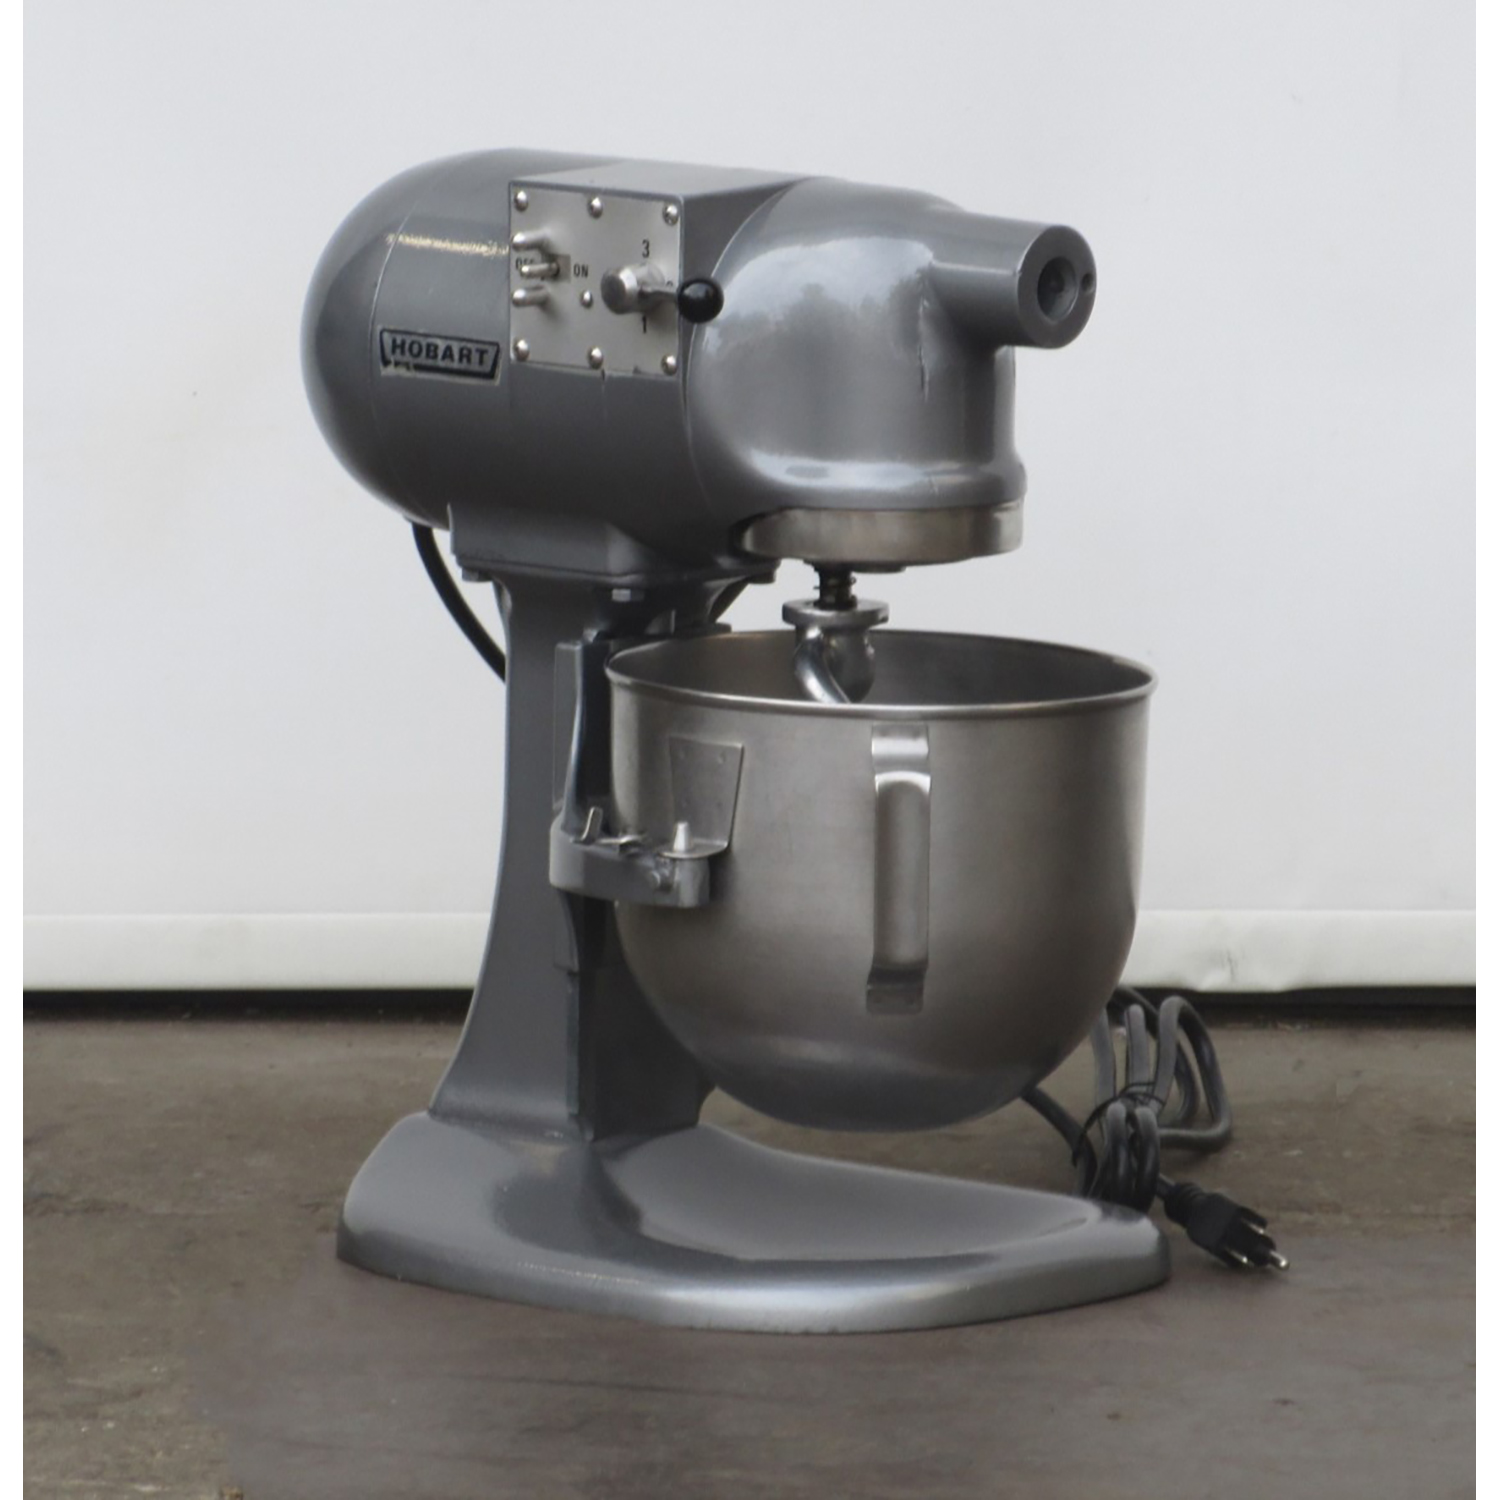 Hobart N50 5-Quart Mixer, Used Excellent Condition